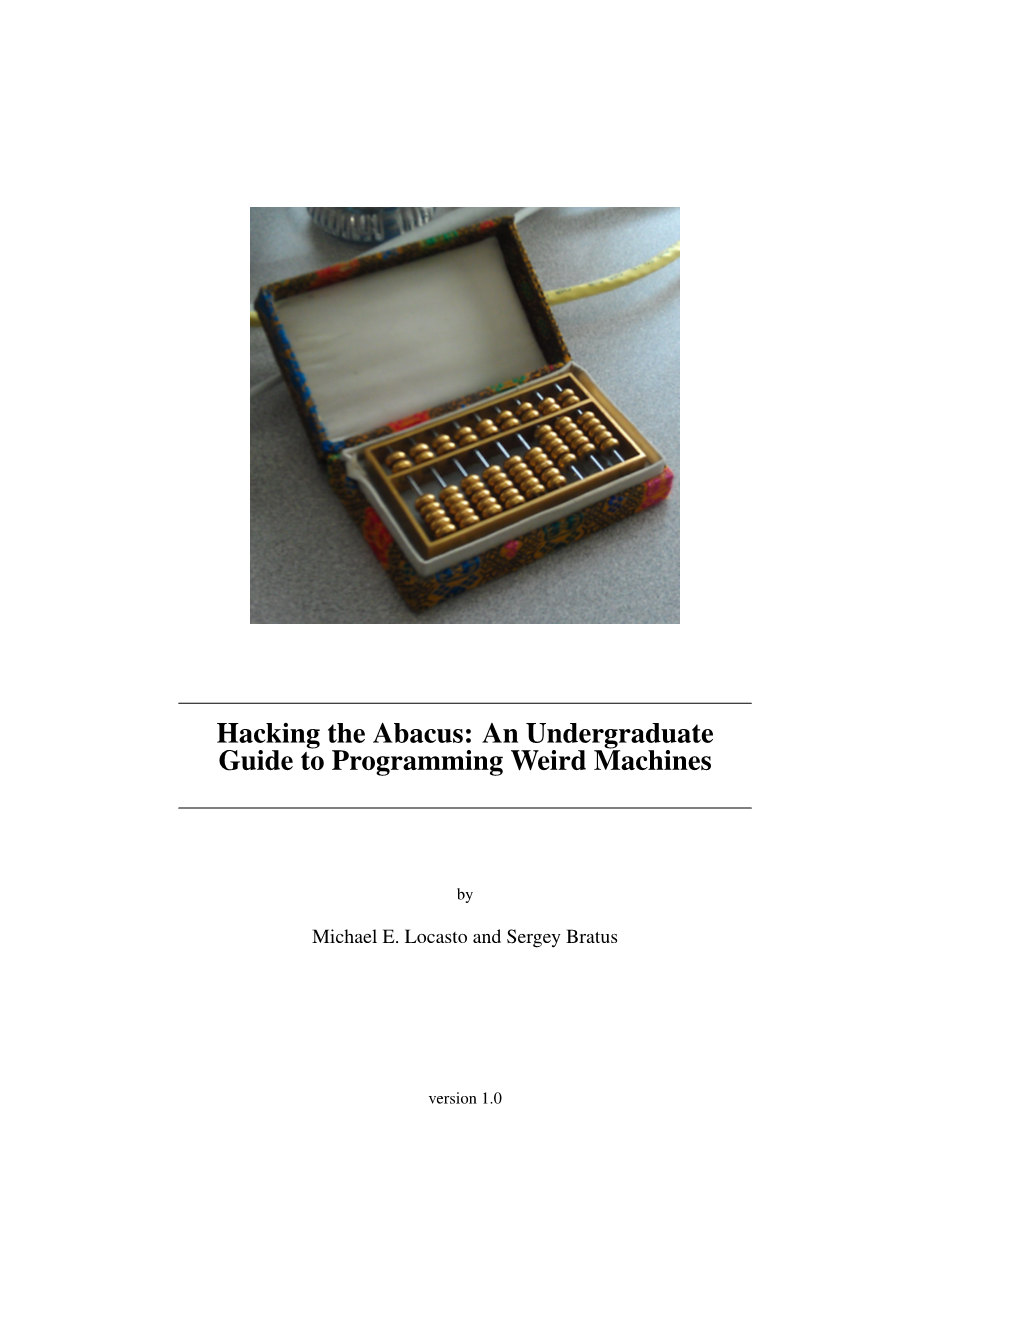 Hacking the Abacus: an Undergraduate Guide to Programming Weird Machines